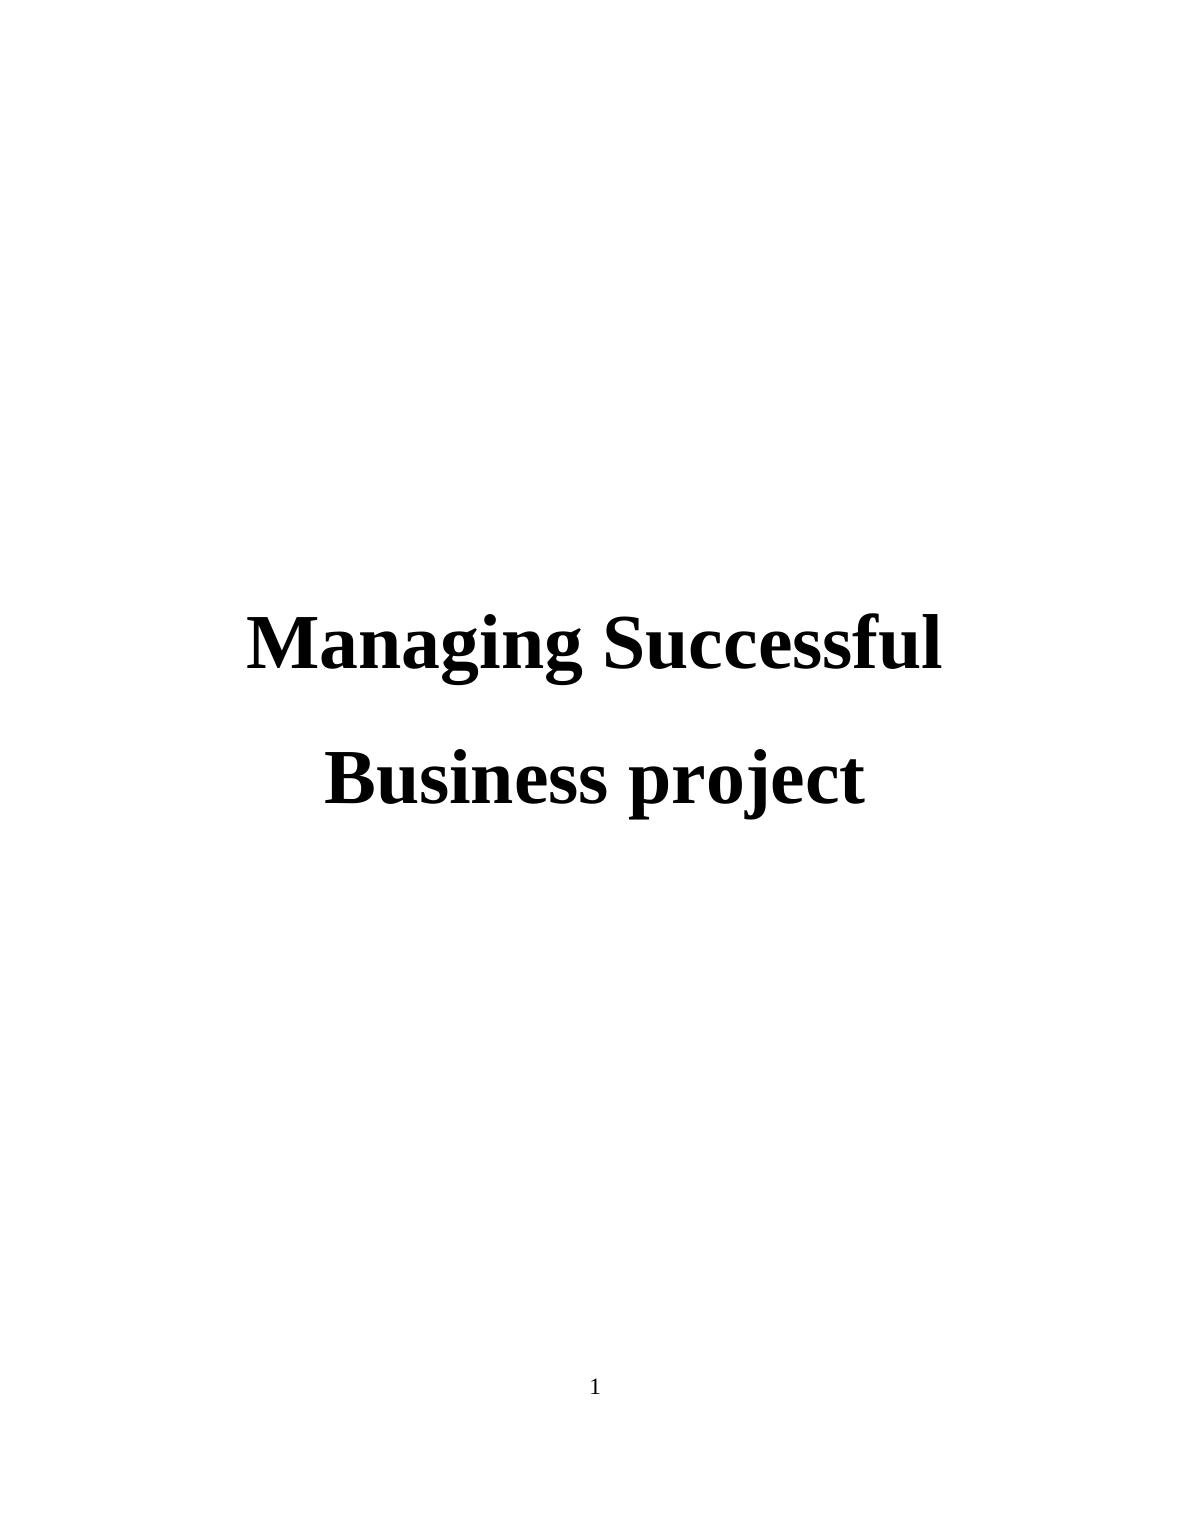 Nisa Case Study - Successful Business Project_1